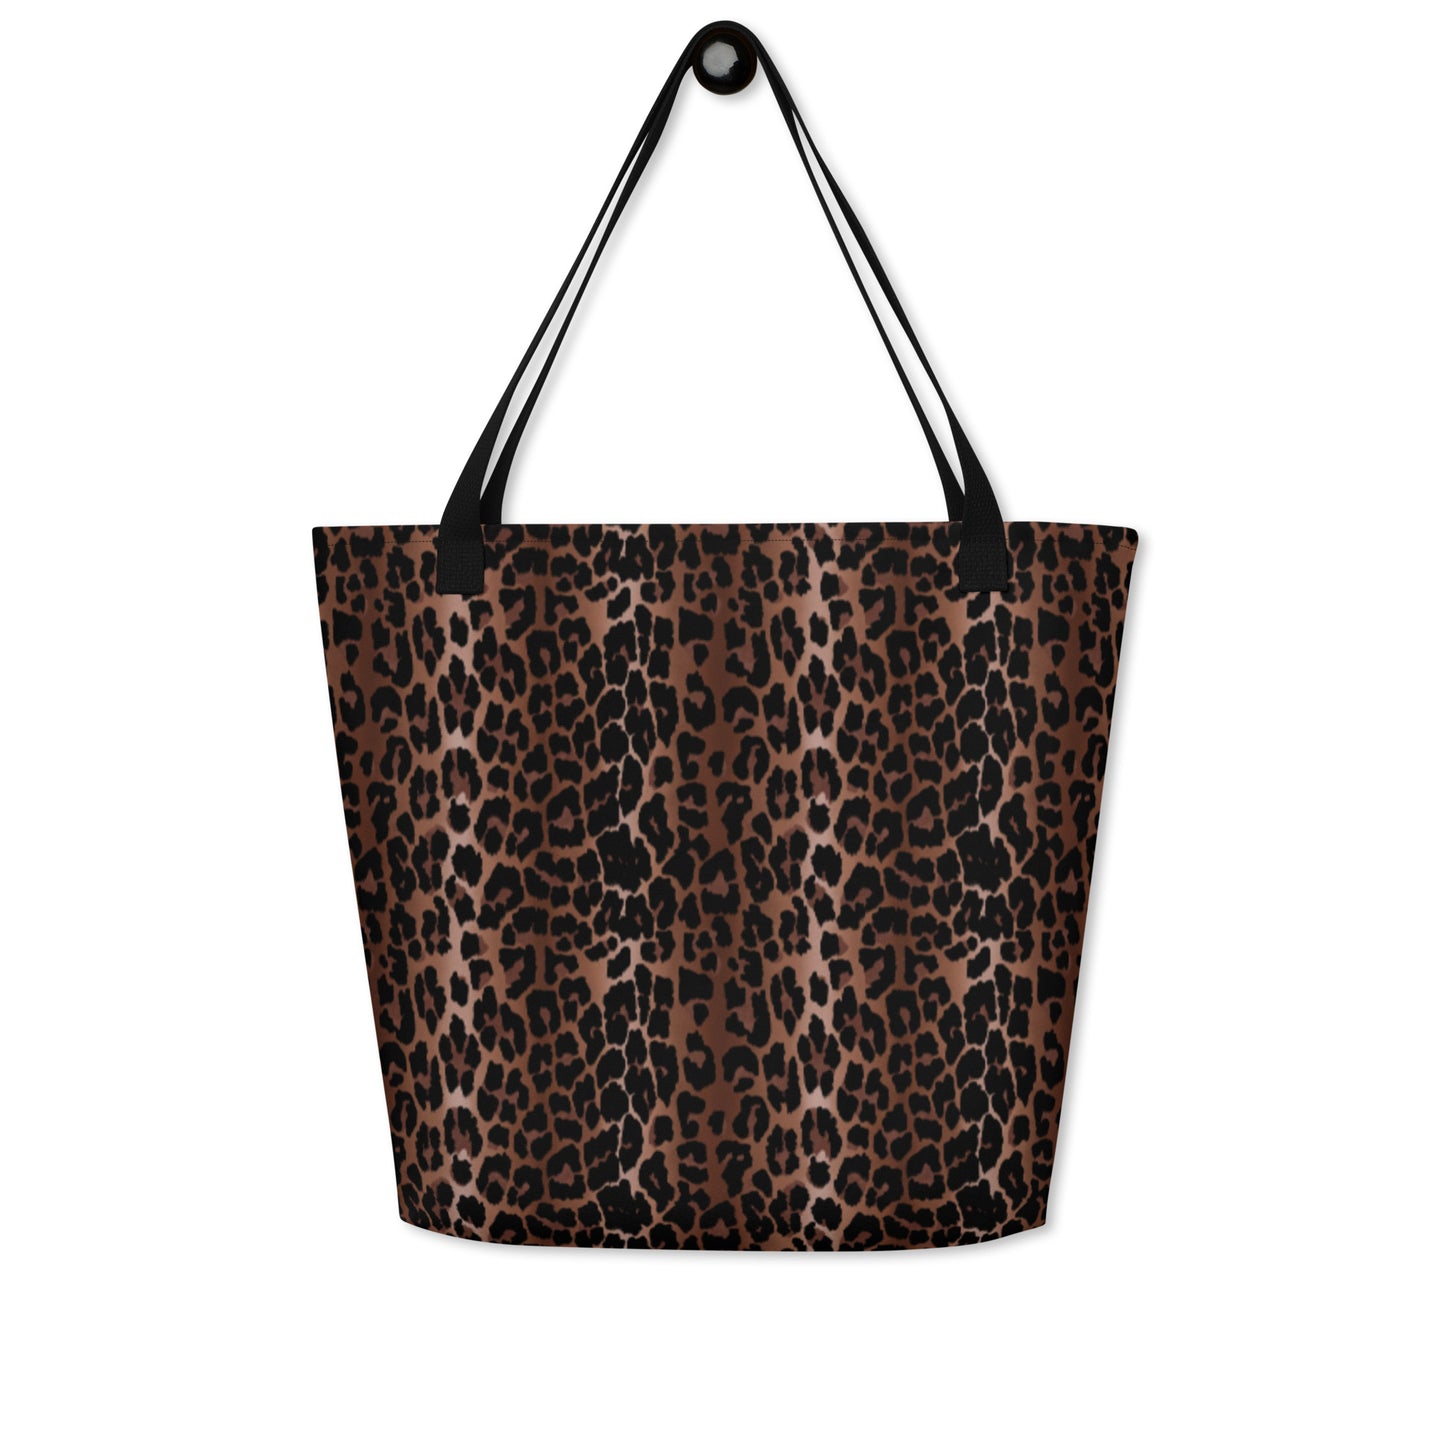 Bethany Large Shopper Tote Bag in OG Leopard Print | Pinup Couture Relaxed